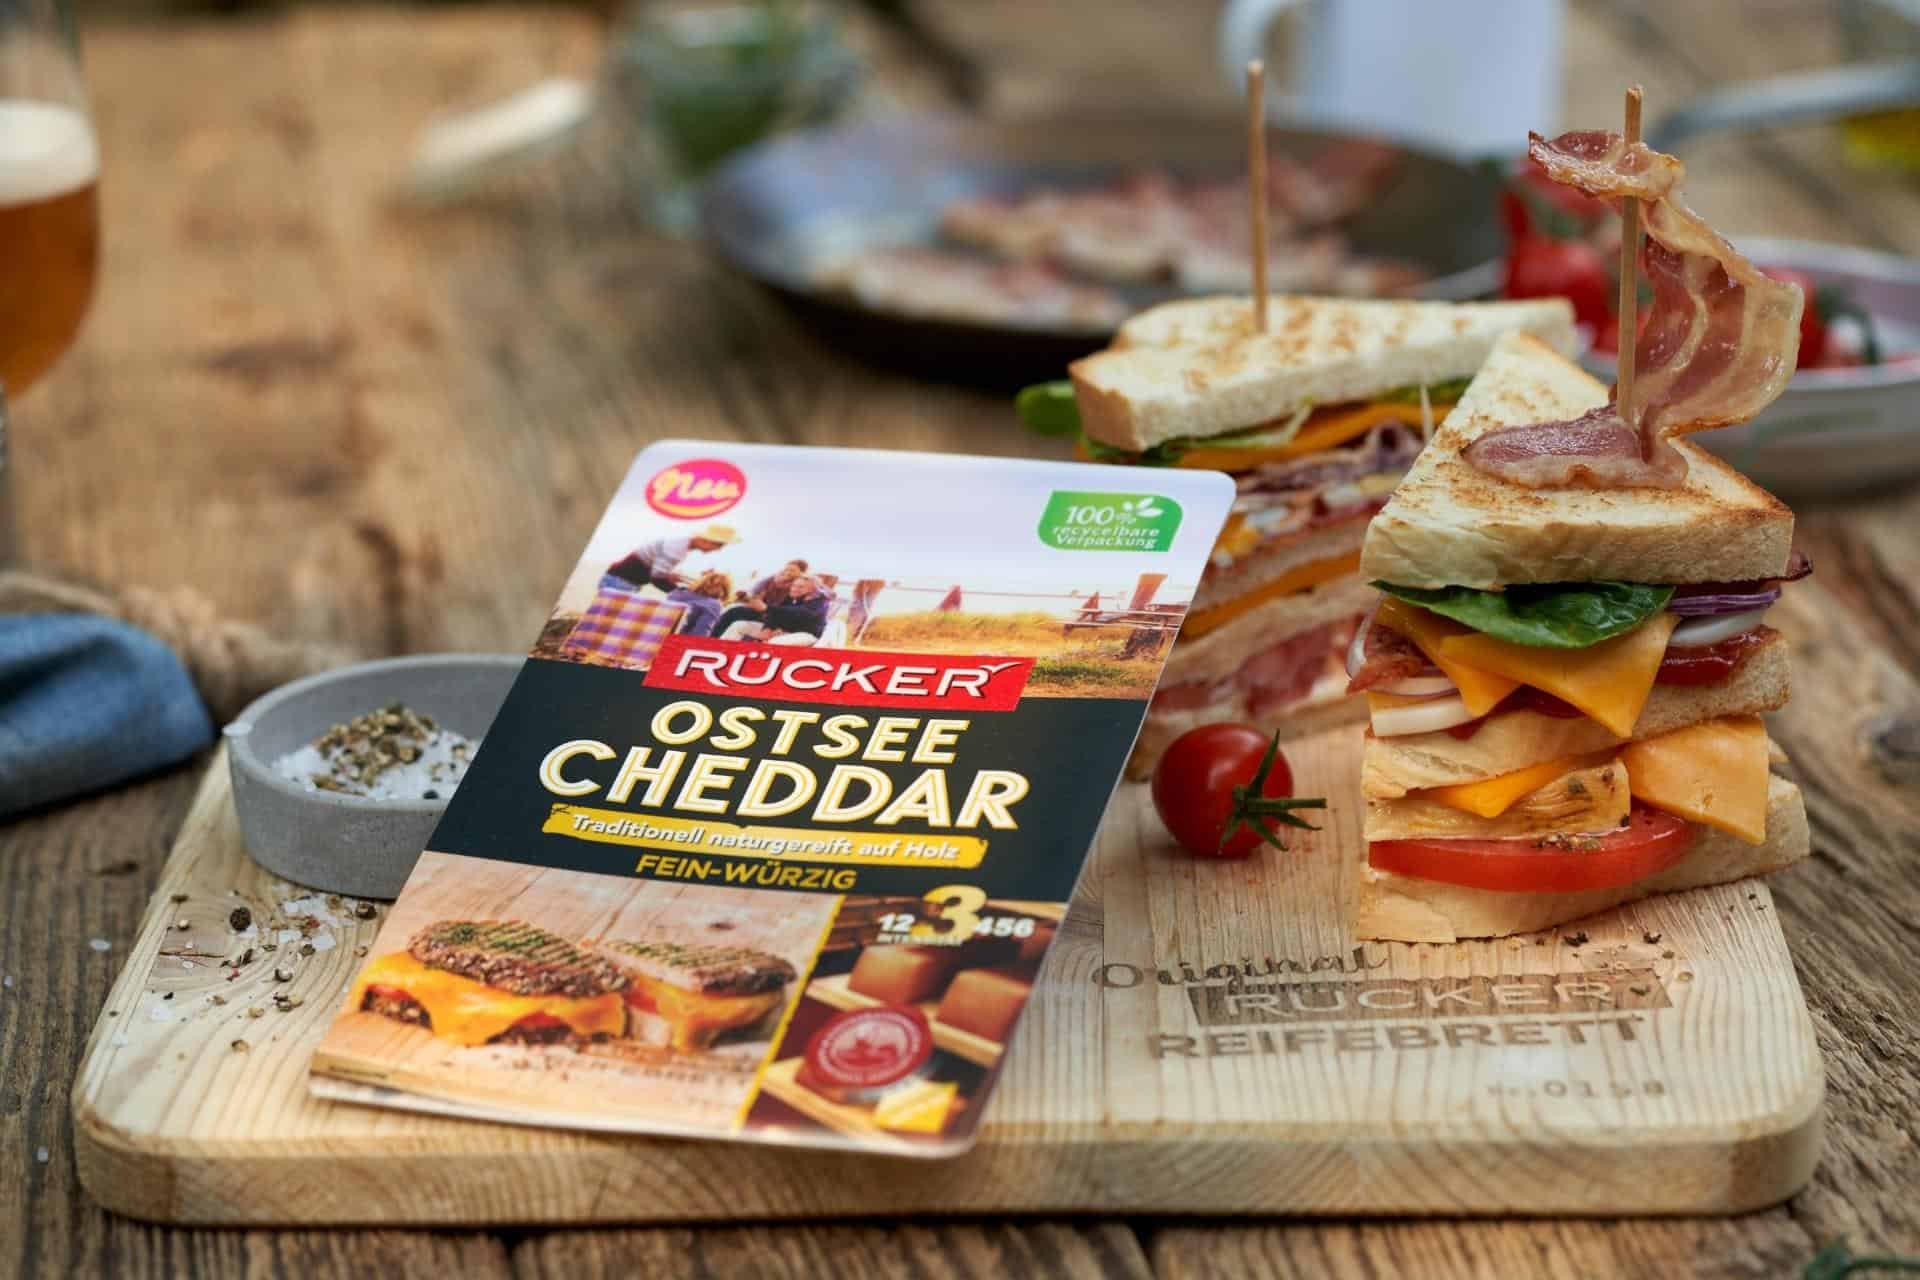 Ostsee Cheddar Landing Page